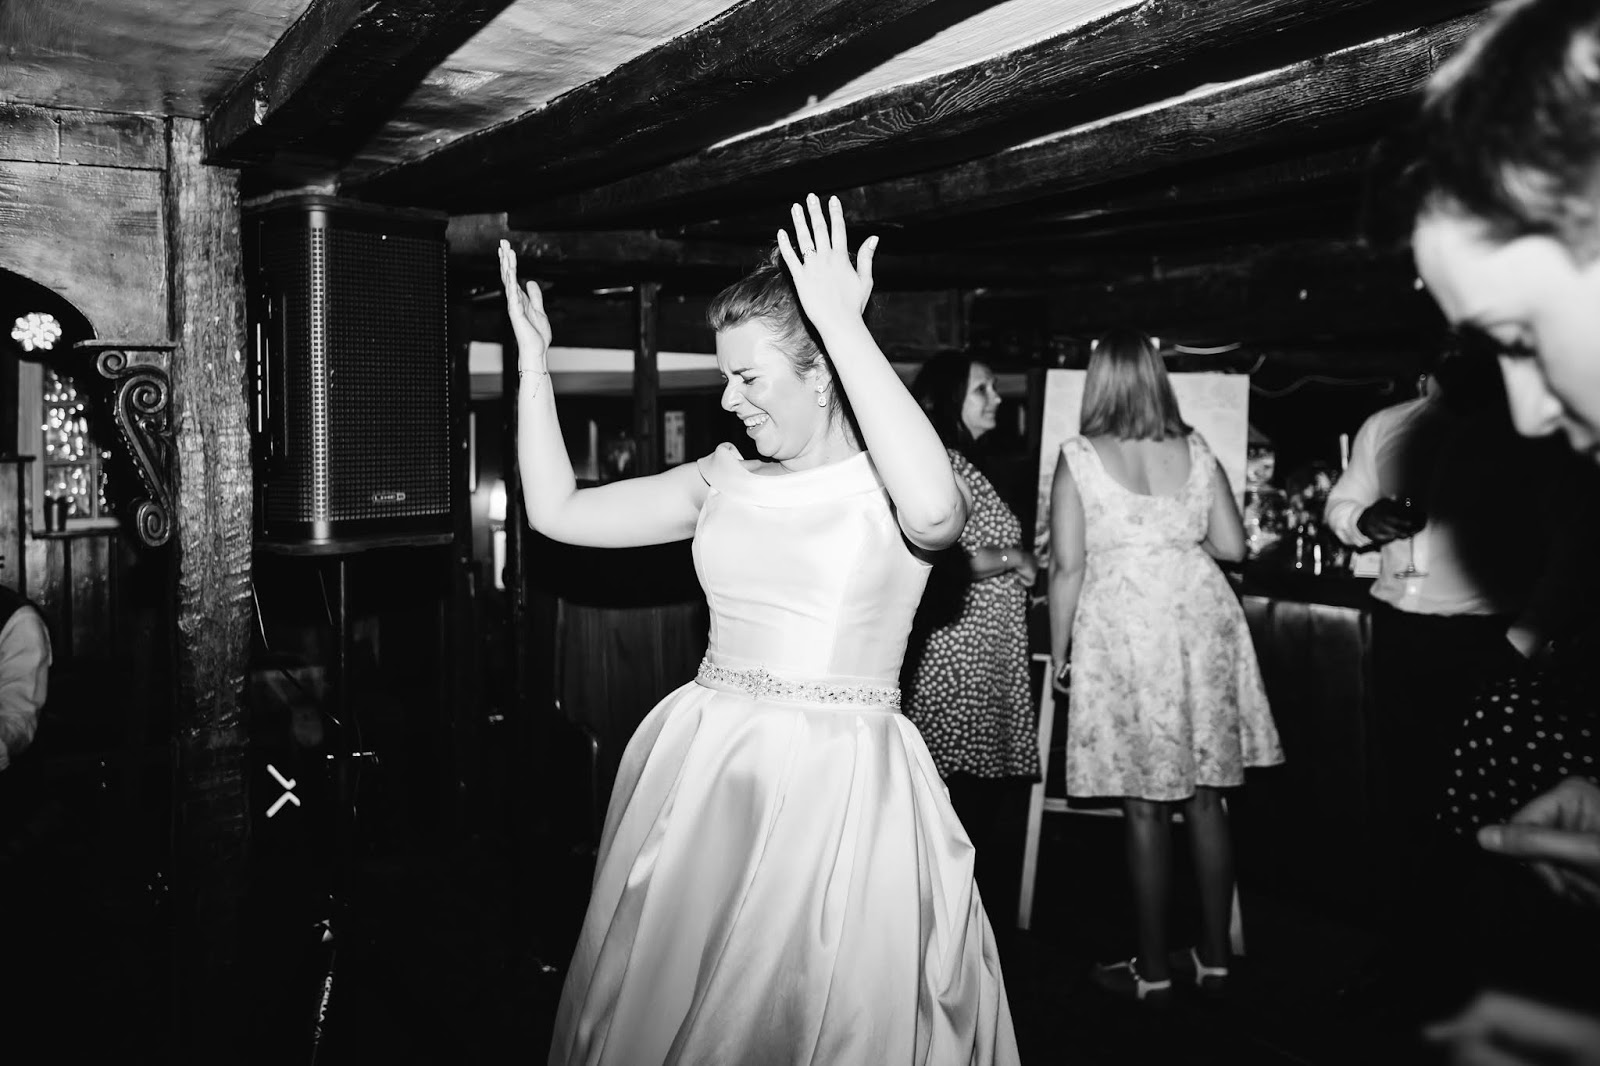 St Albans Wedding: The Party!